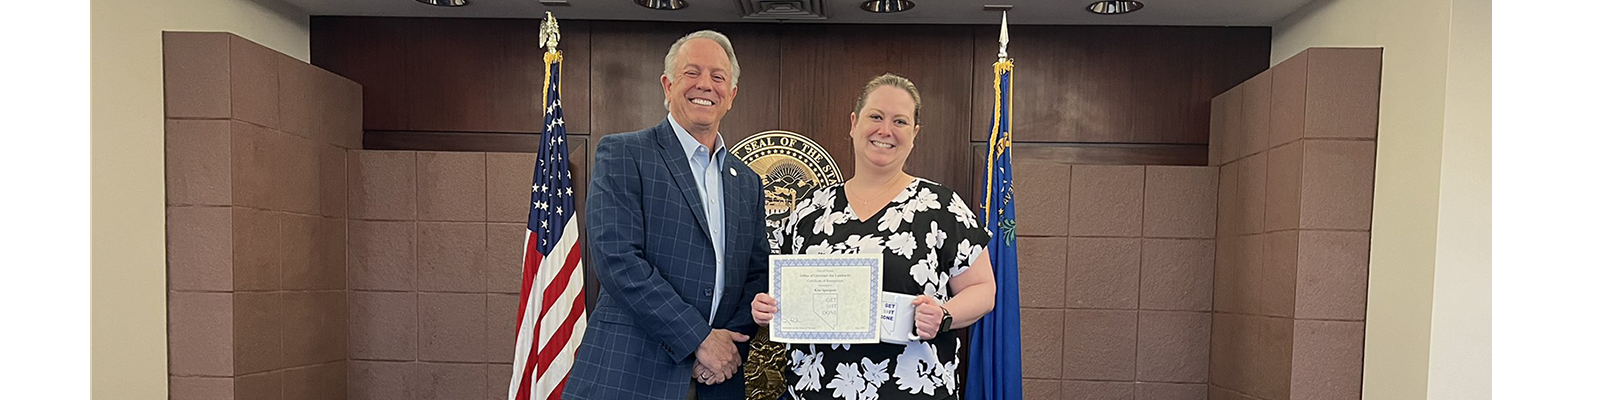 Governor Lombardo giving Nevada Film Office Las Vegas Employee Kim Spurgeon her 'Get Sh*t Done' Award on Nevada State Employee Appreciation Day